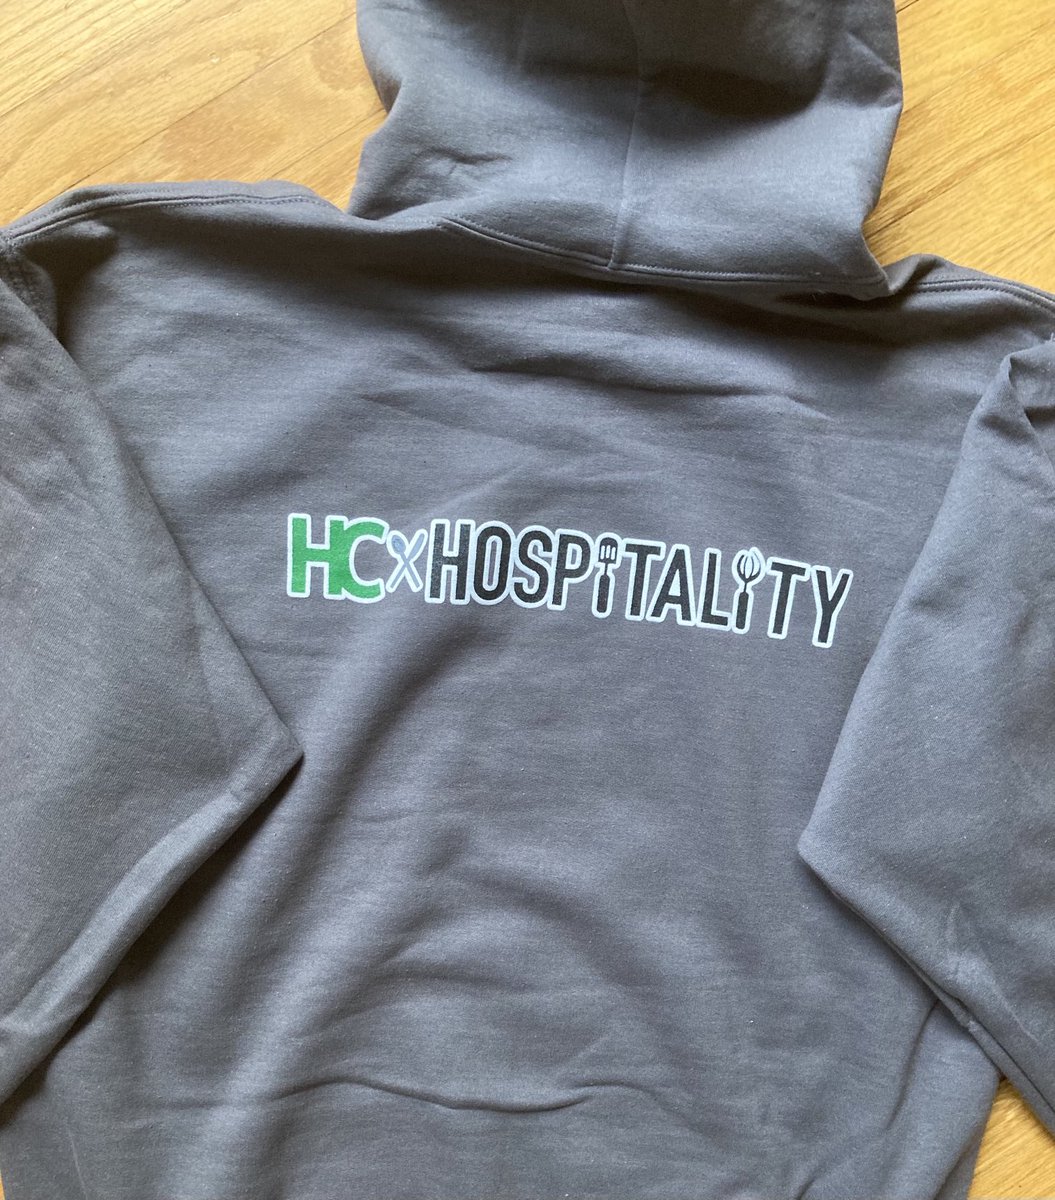 New swag is here— just in the nick of time! Huge shout-out to the Com Tech class who designed our new logos for us! #taketech